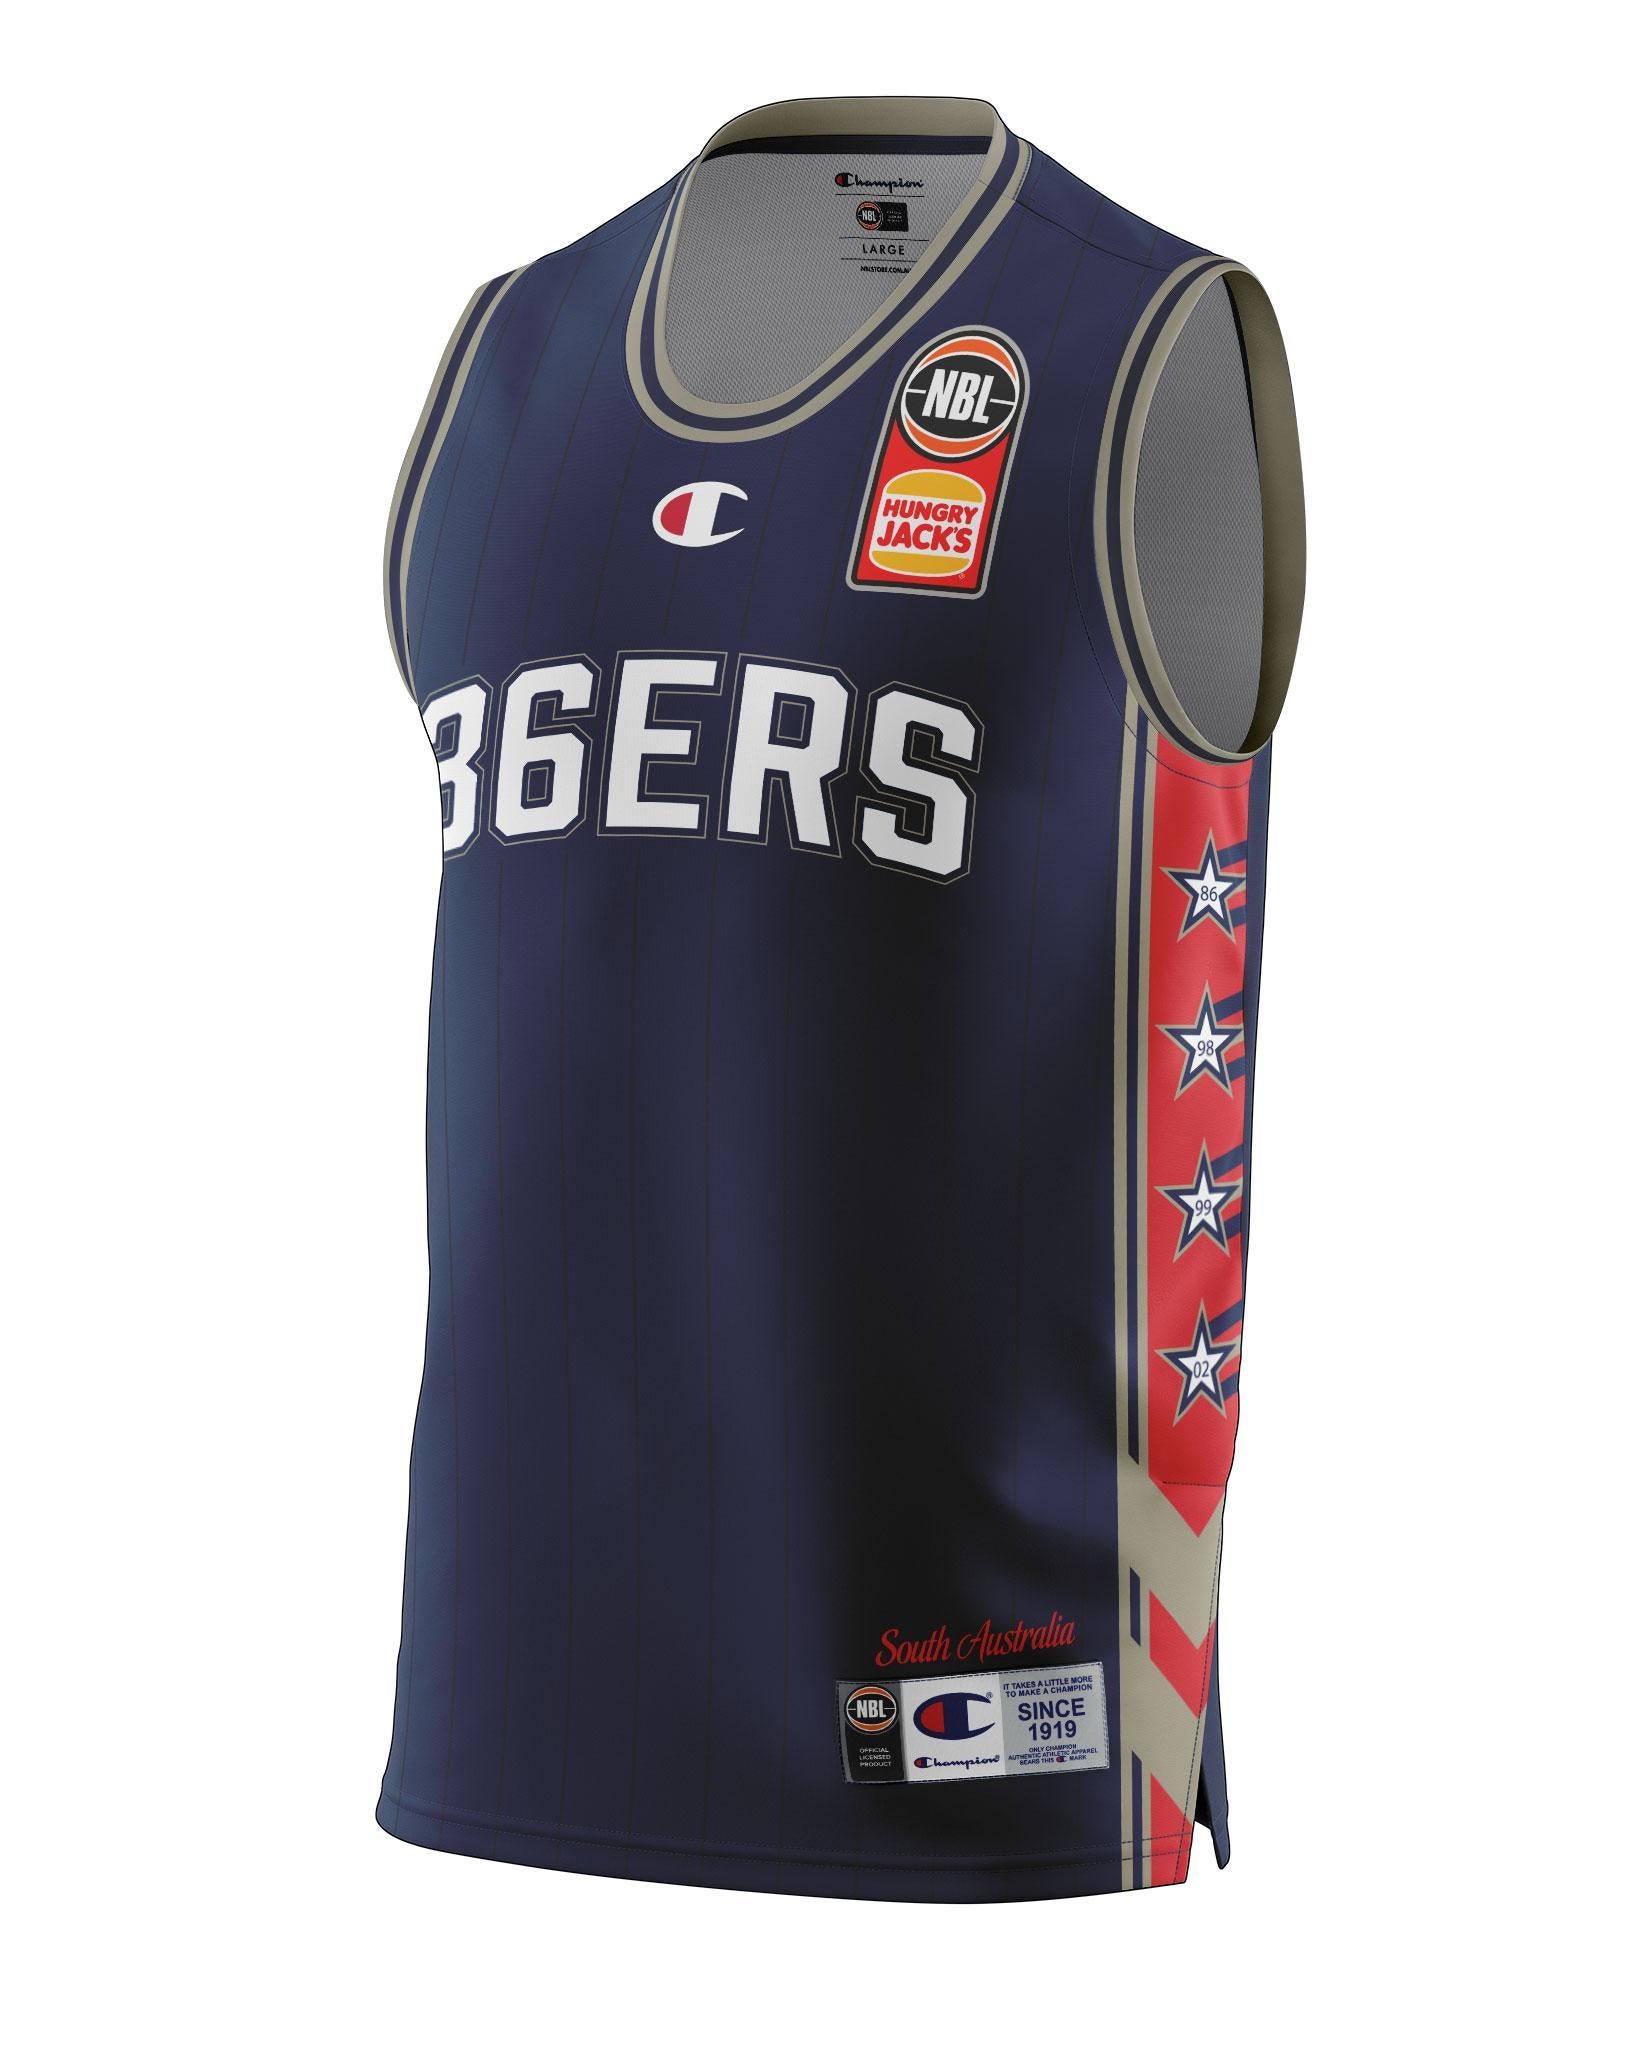 Adelaide 36ers 2021/22 Authentic Adult Home Jersey - Adelaide 36ers